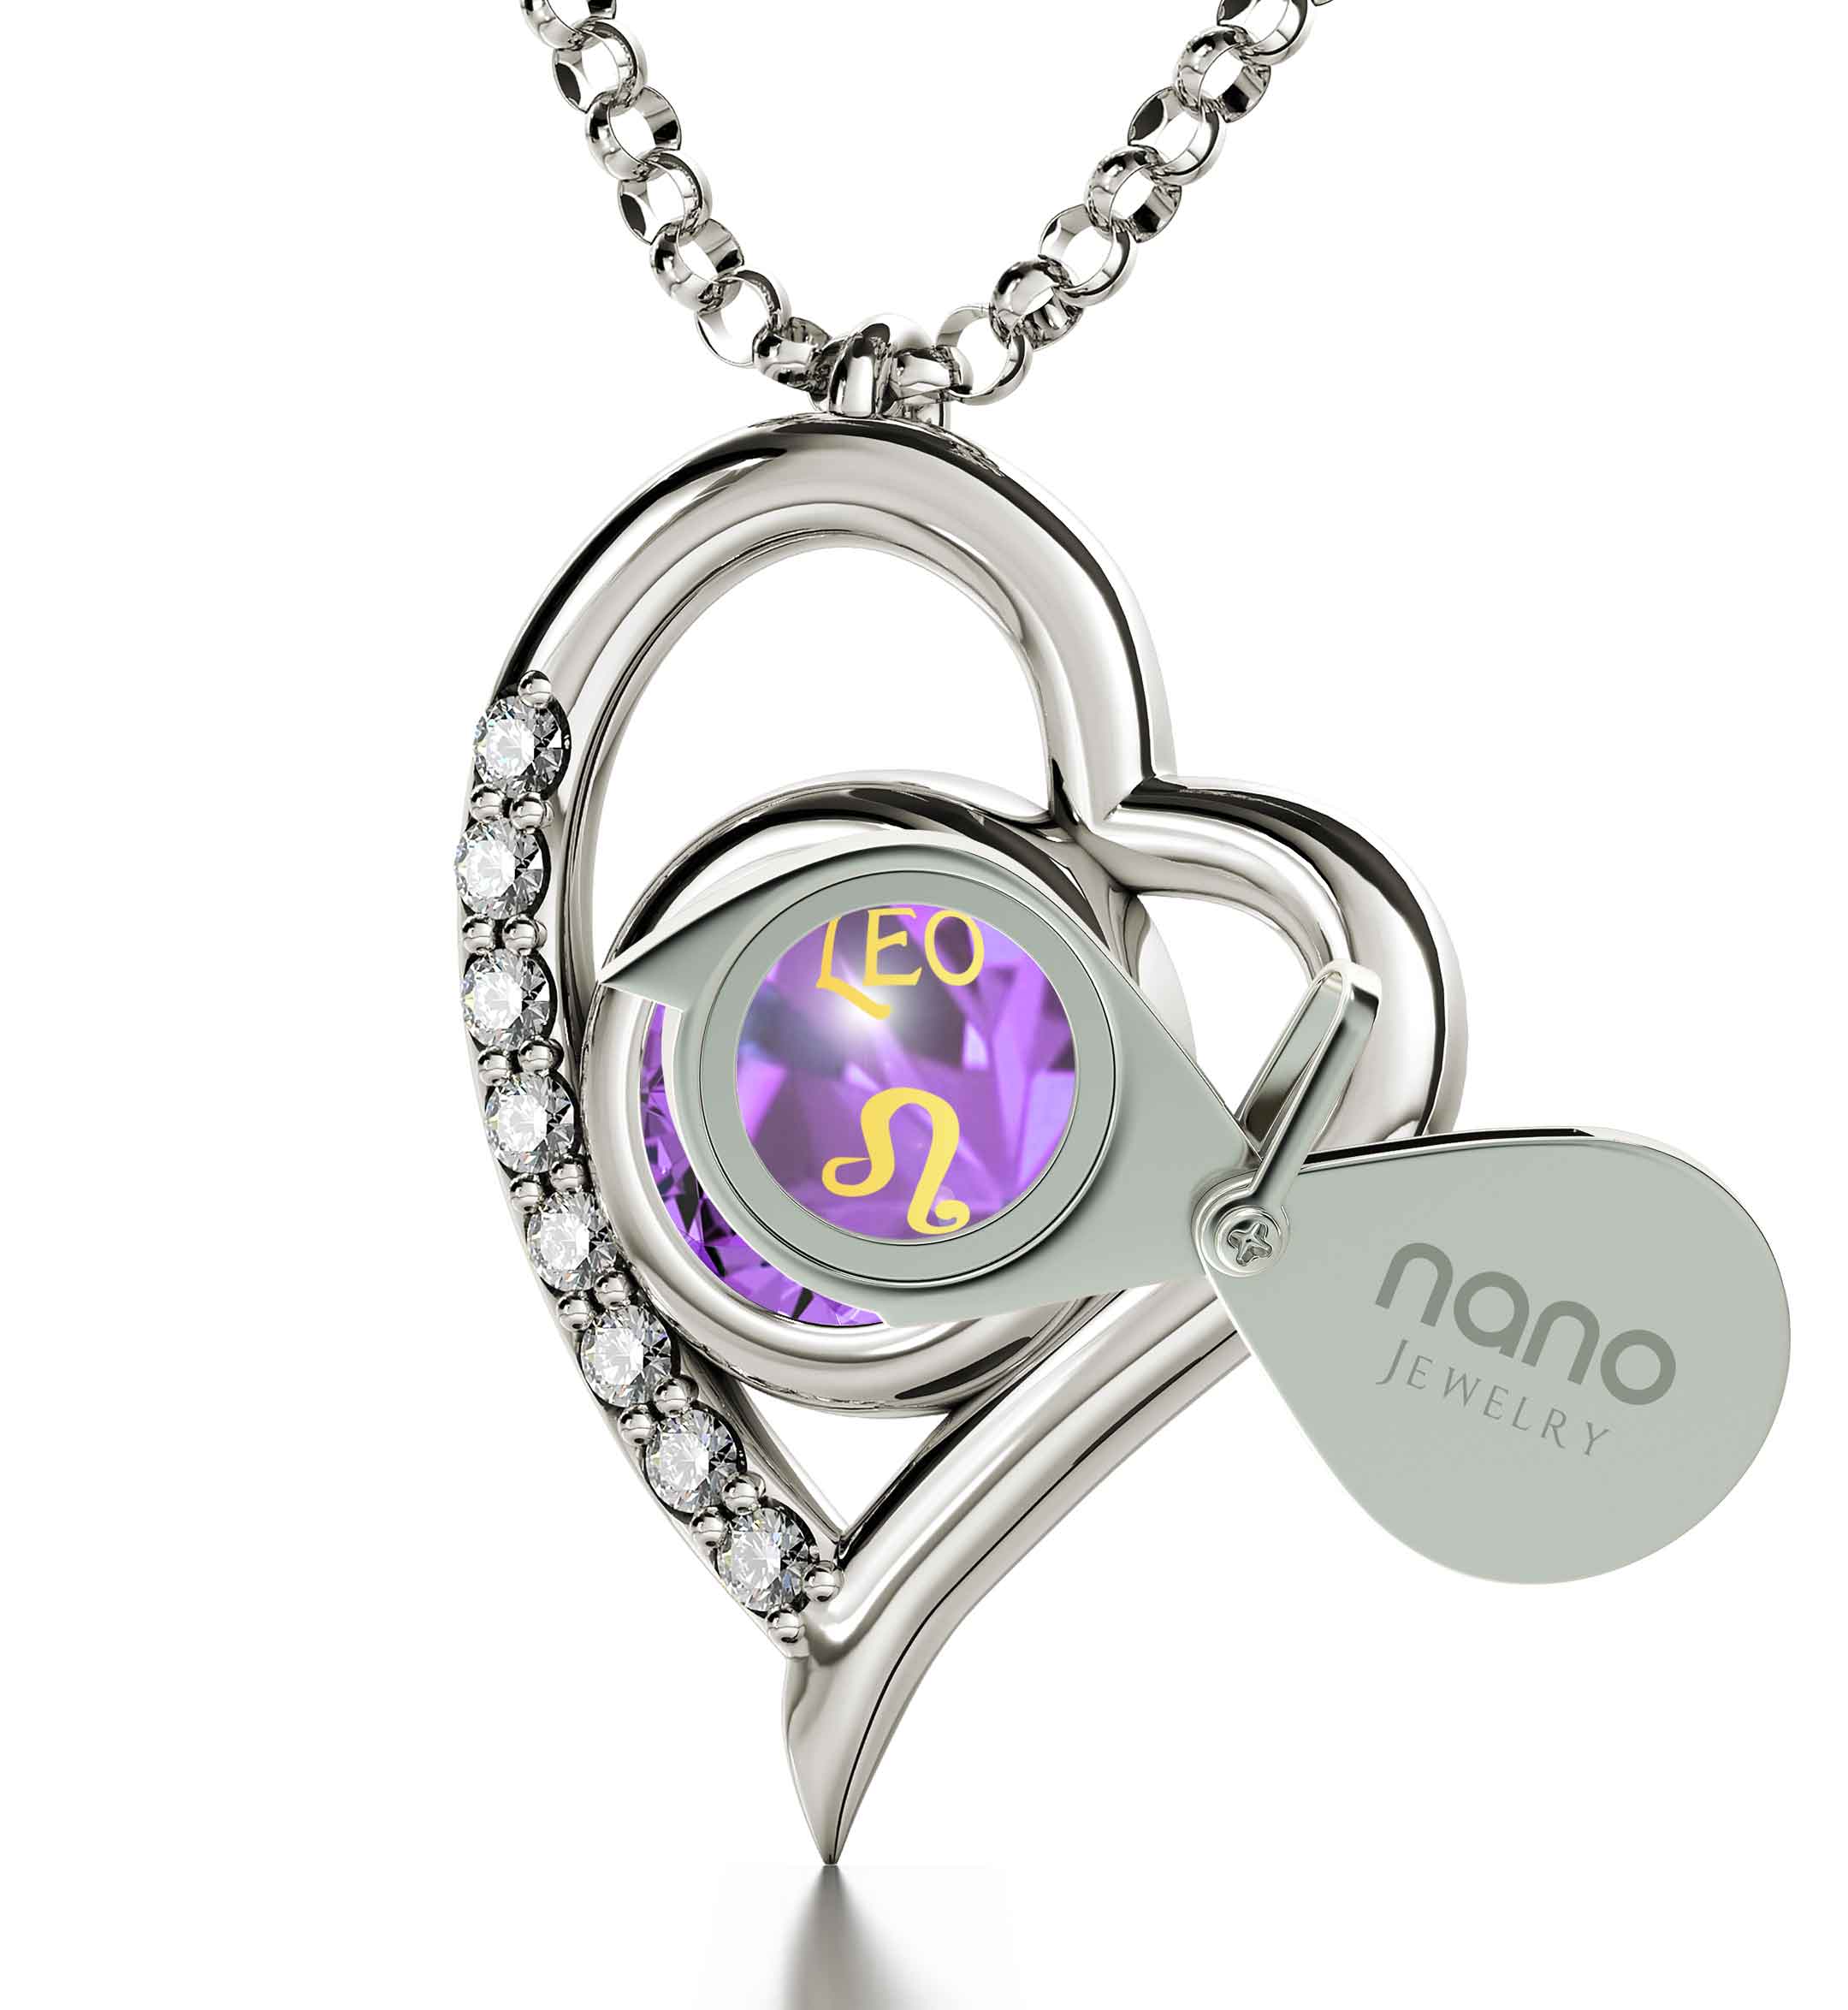 925 Sterling Silver Leo Necklace Zodiac Heart Pendant 24k Gold Inscribed on Crystal heart-shaped pendant necklace with "Leo" sign, adorned with Swarovski crystals, featuring a green inset and a tag labeled "nano jewelry.